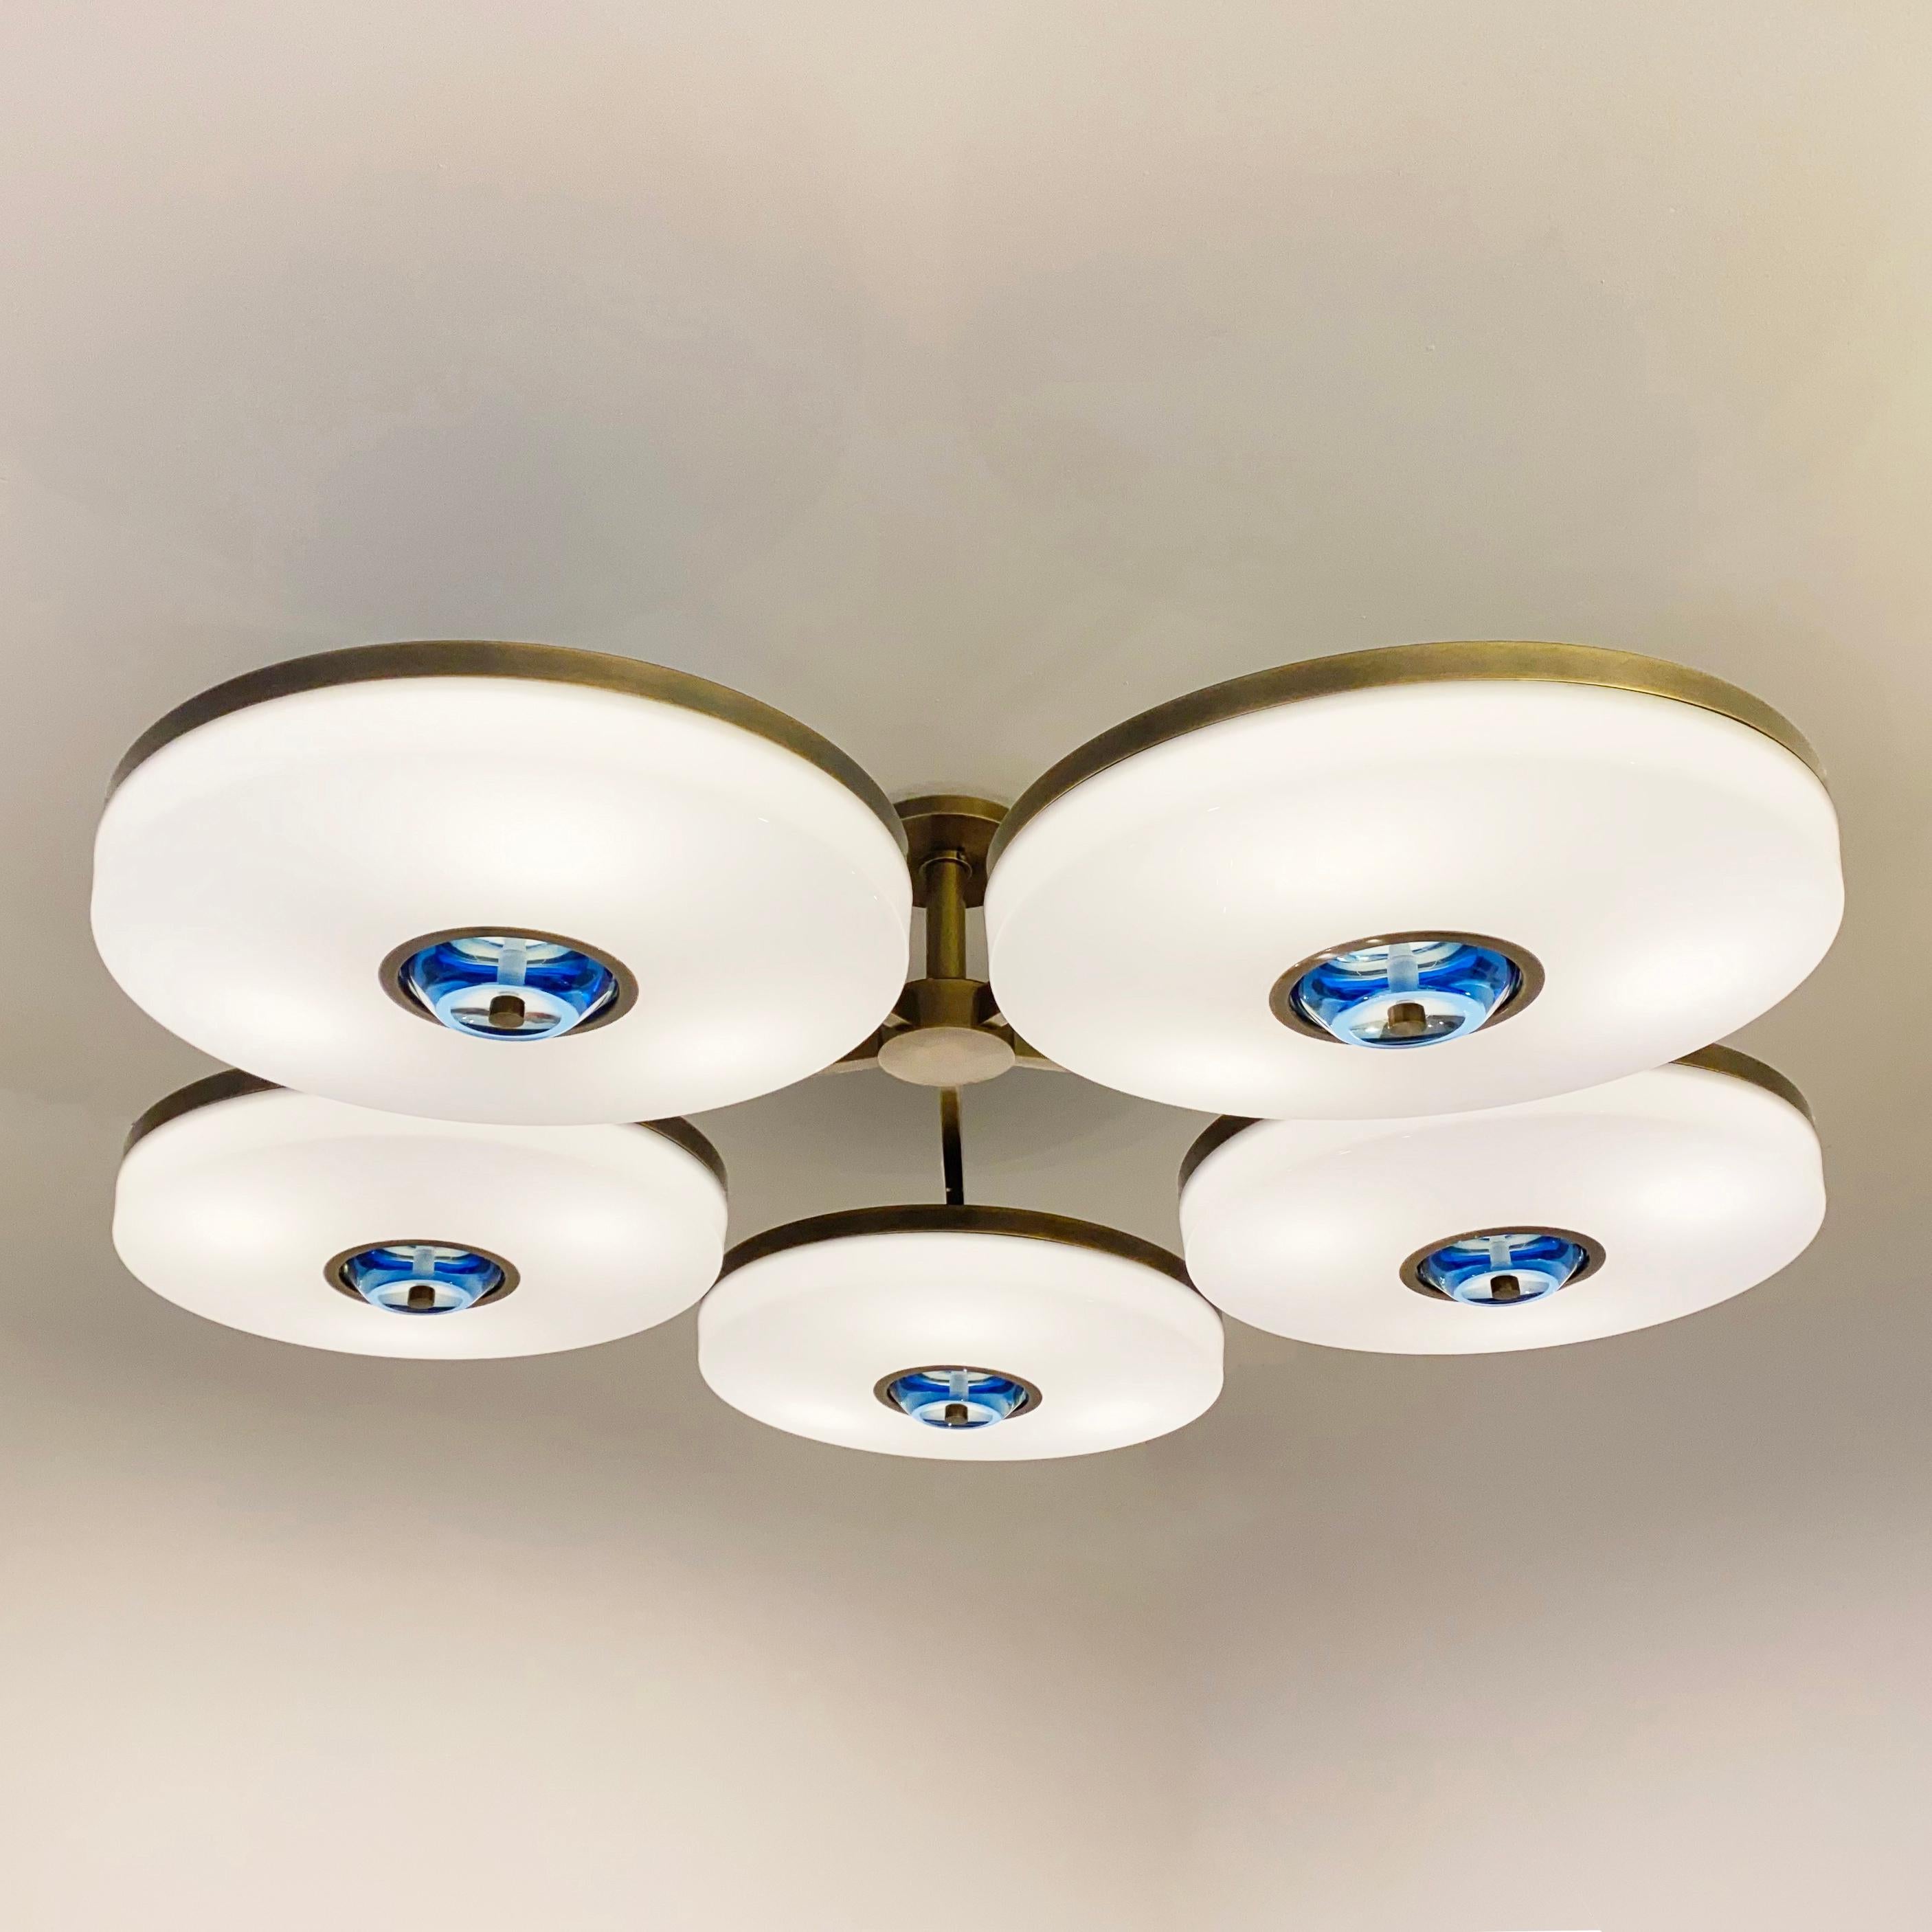 The Iris N.5 ceiling light is designed around five expansive acrylic shades with hand carved glass centers. This versatile fixture can be installed on a stem or as a flush mount. The first images show the fixture in our Bronzo Ottone (bronze)